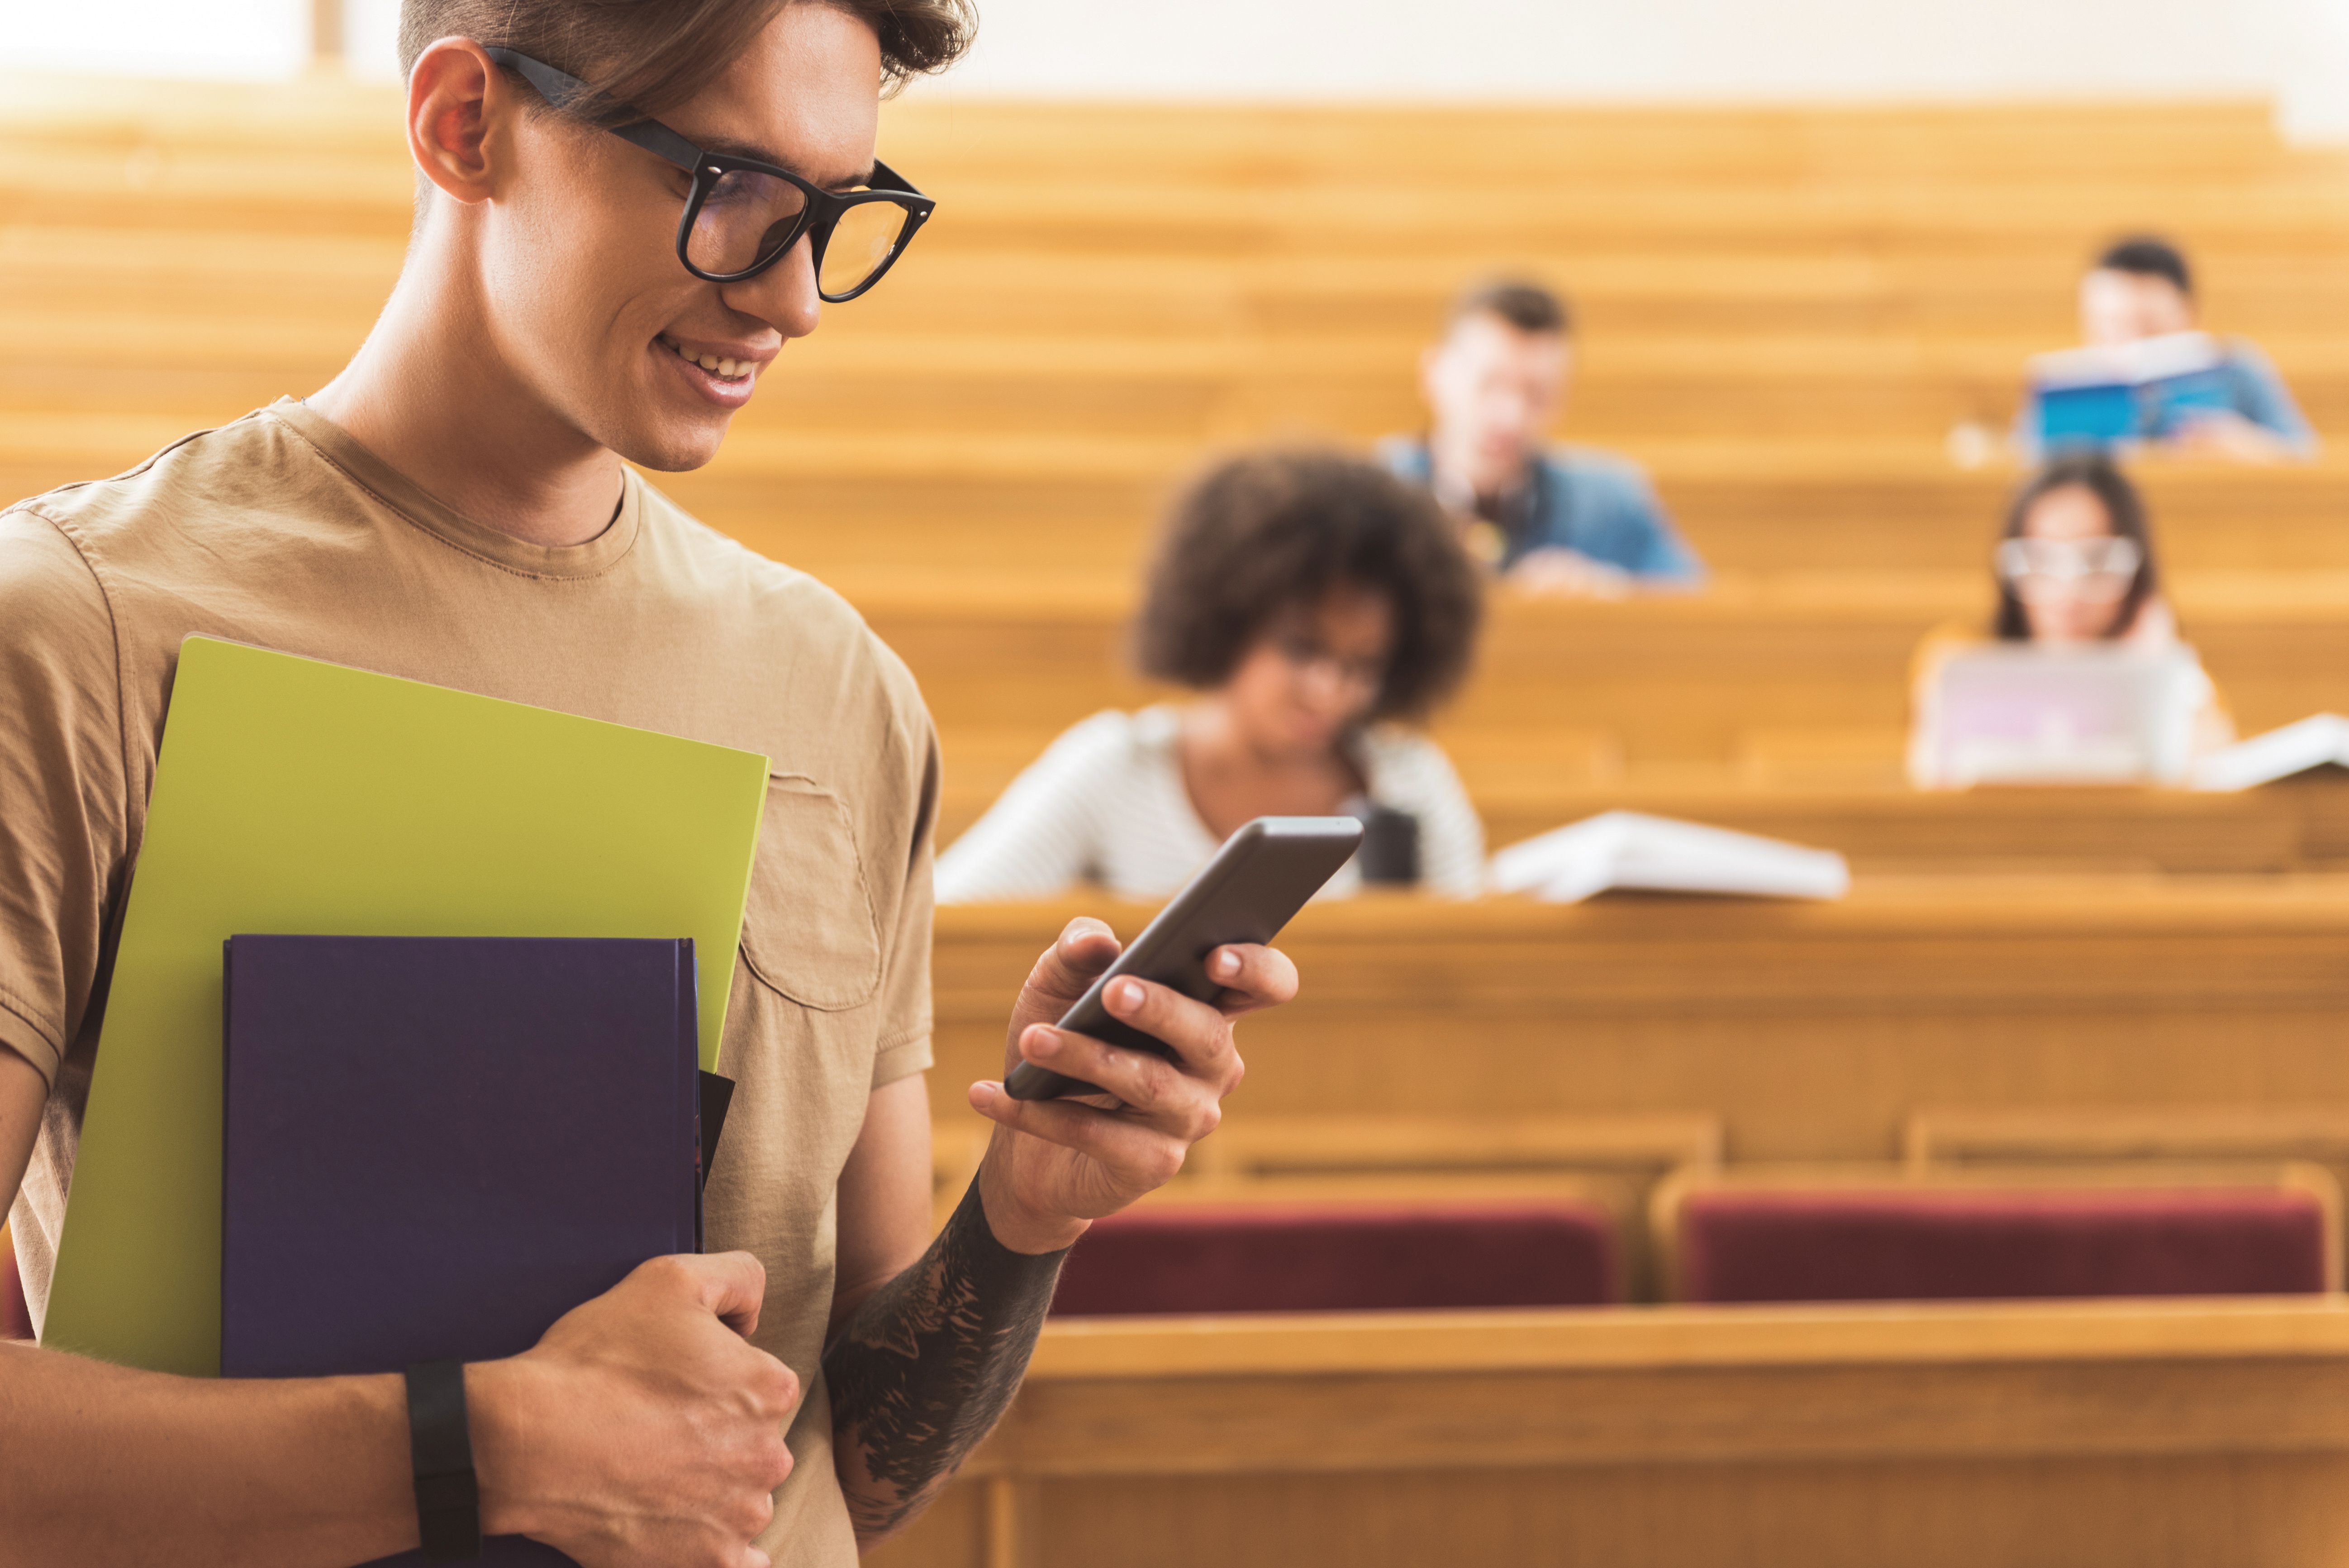 Today, smartphones are always at hand. This makes them perfect as a means of identification on campus.